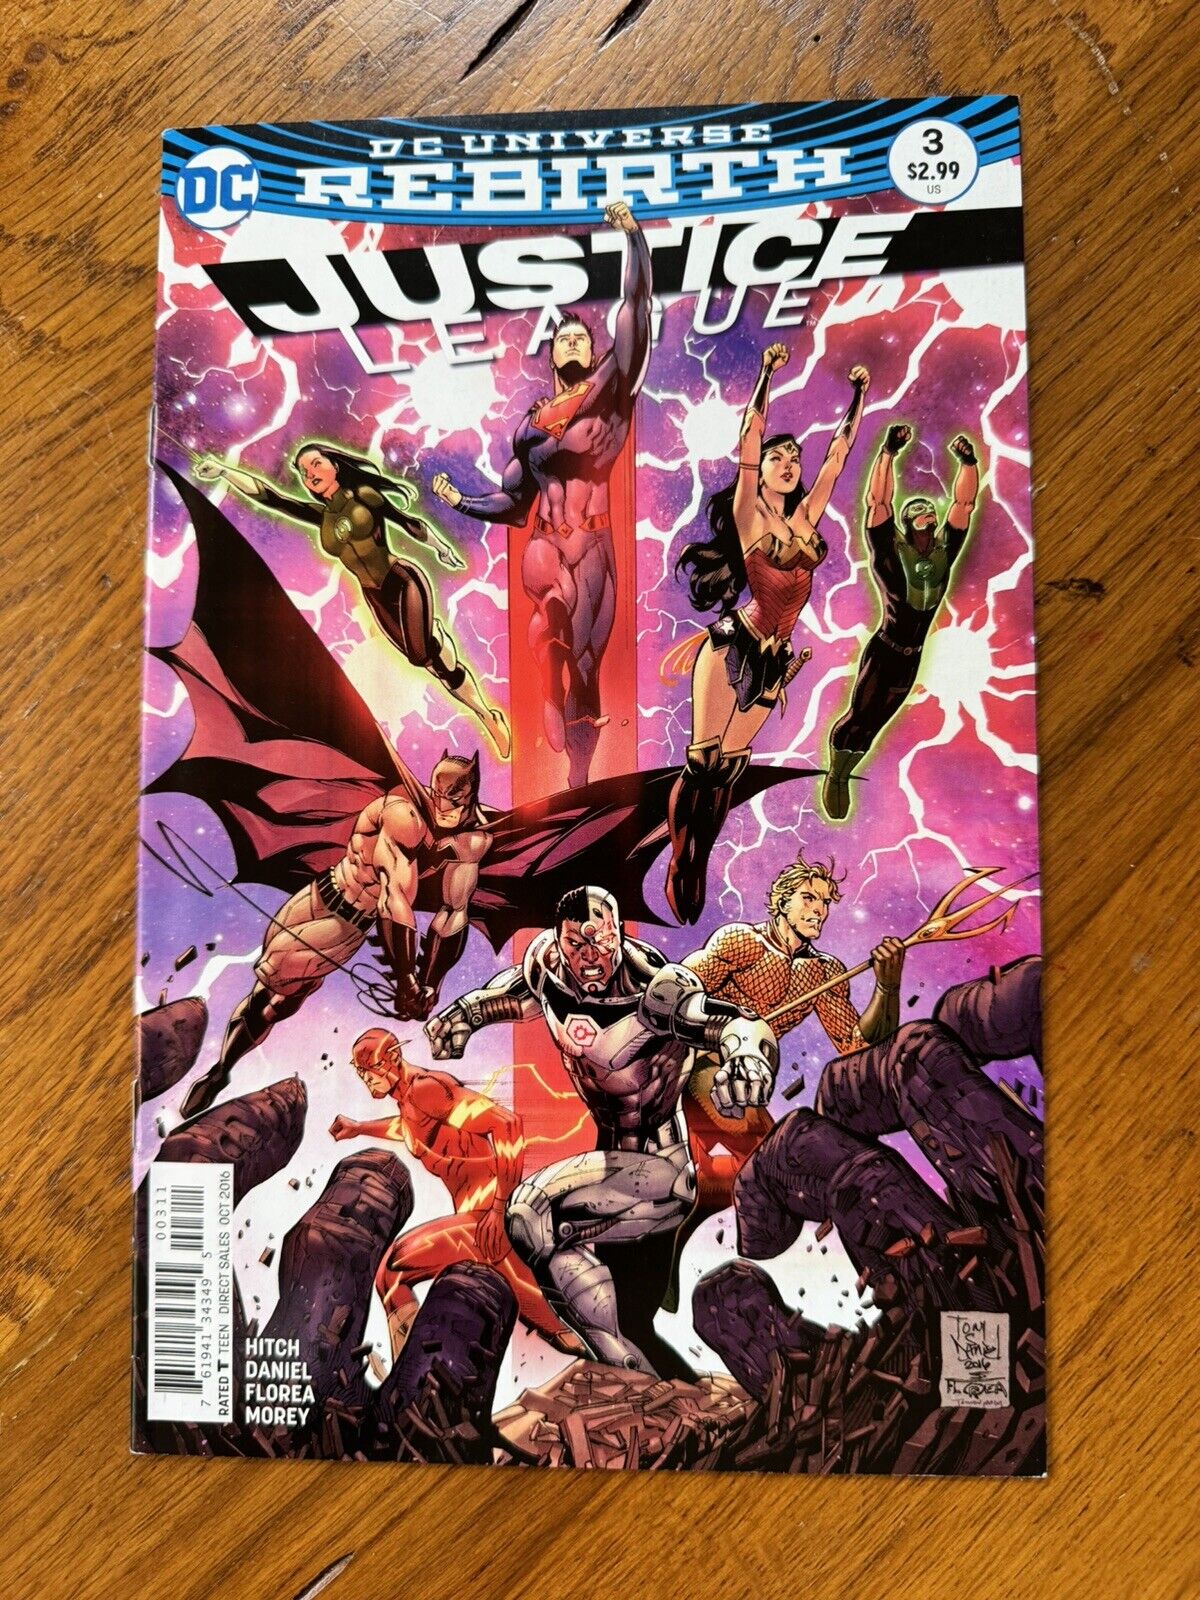 Justice League #3 (DC Comics, October 2016)- Bagged & Boarded